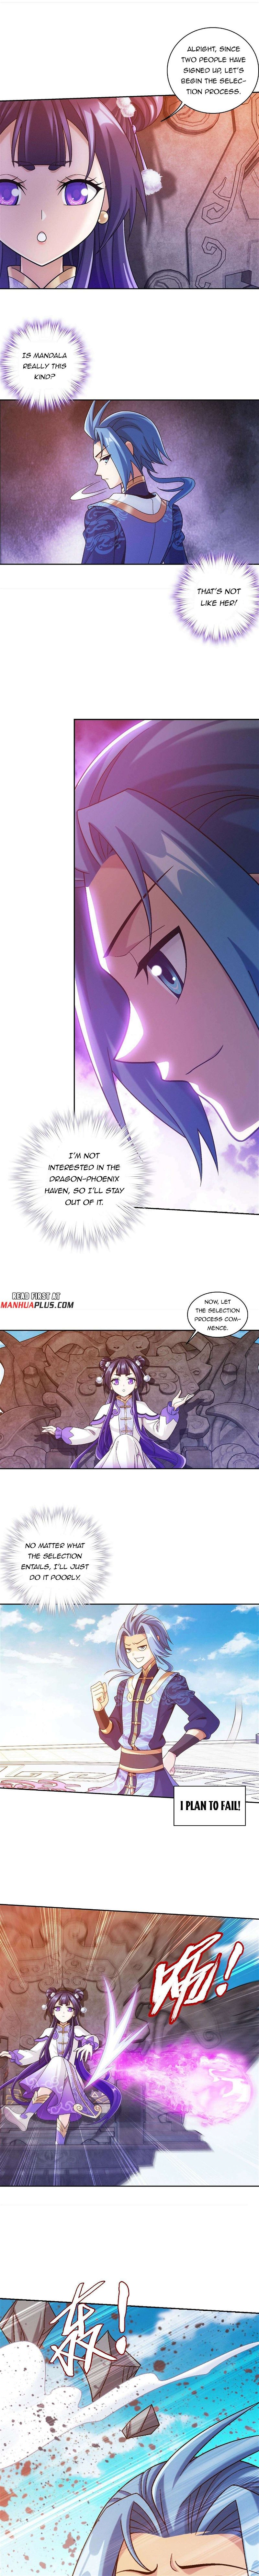 The Great Ruler Chapter 421 page 7